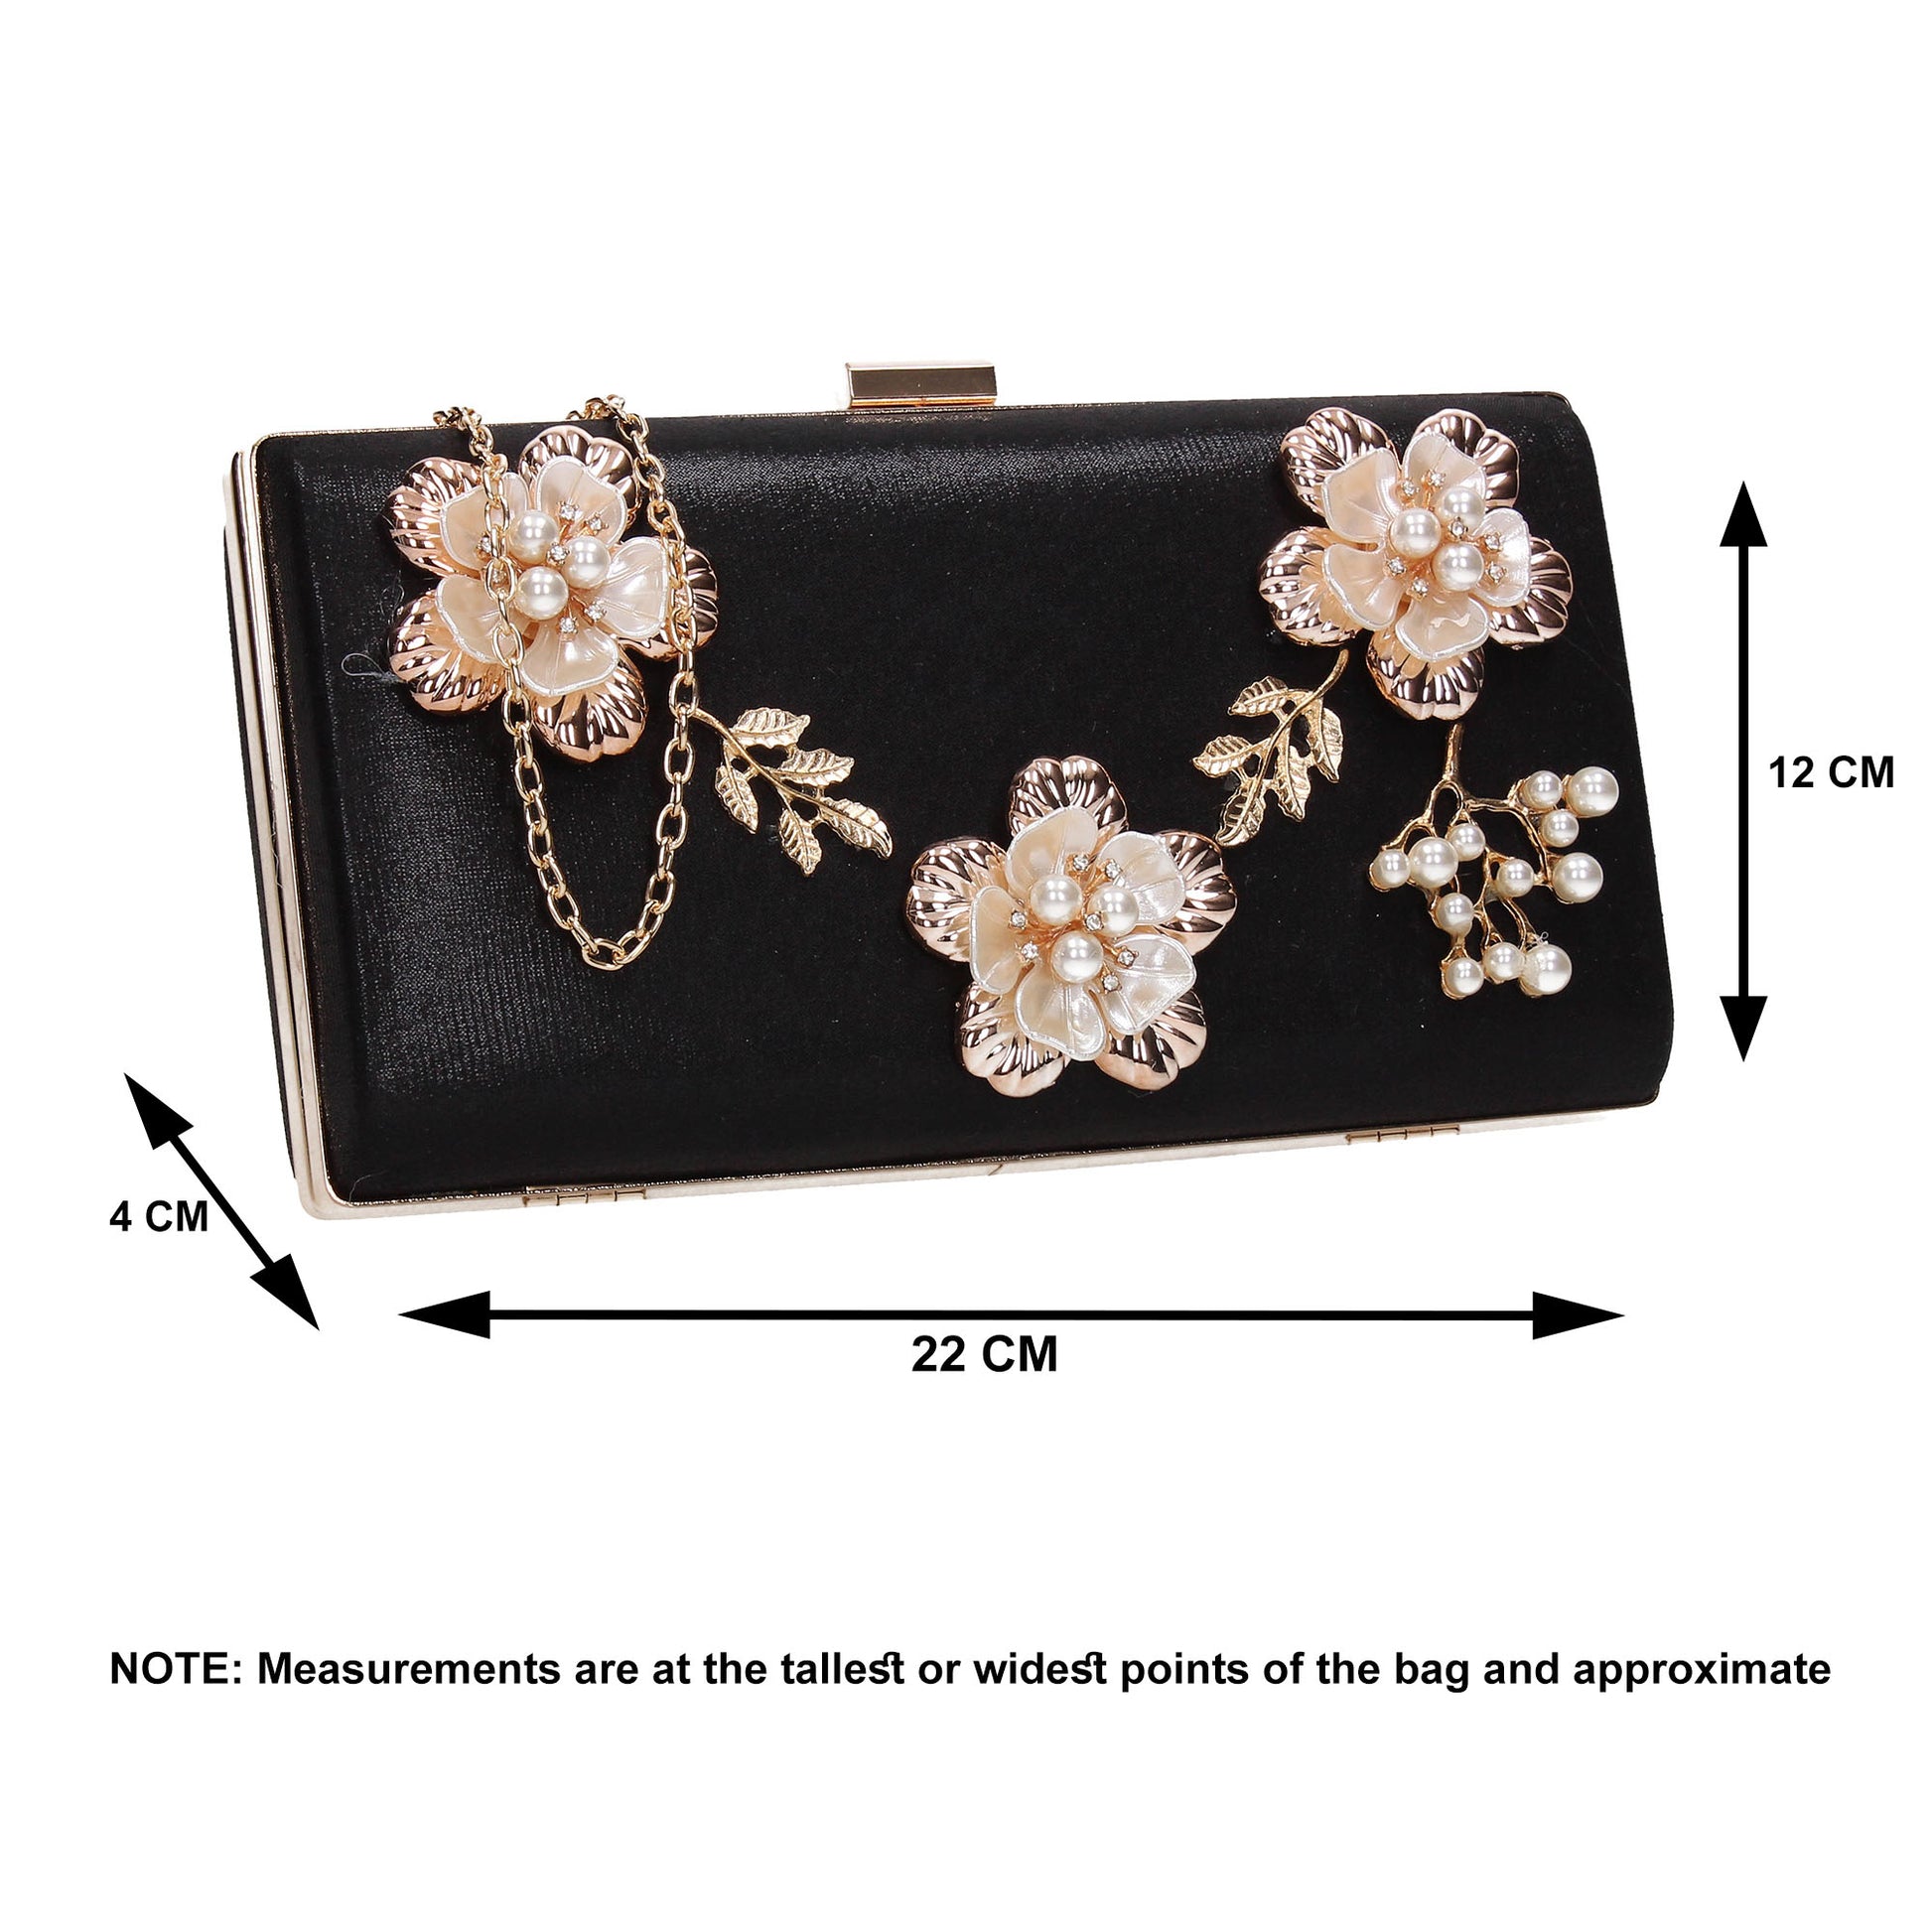 SWANKYSWANS Payton Floral Detail Clutch Bag Pink Cute Cheap Clutch Bag For Weddings School and Work